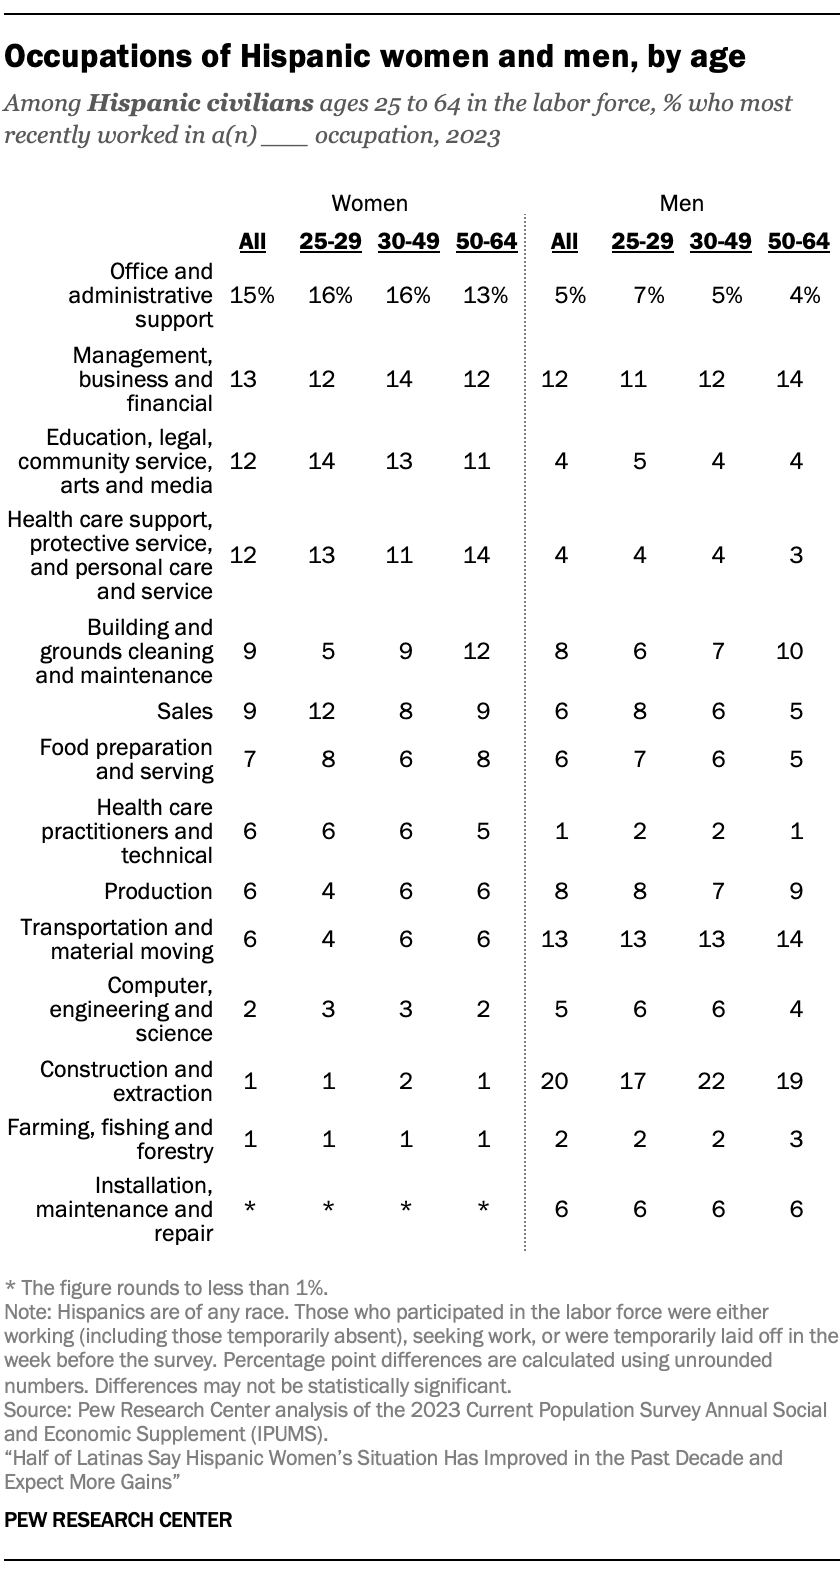 A table showing occupations of Hispanic women and men by age.